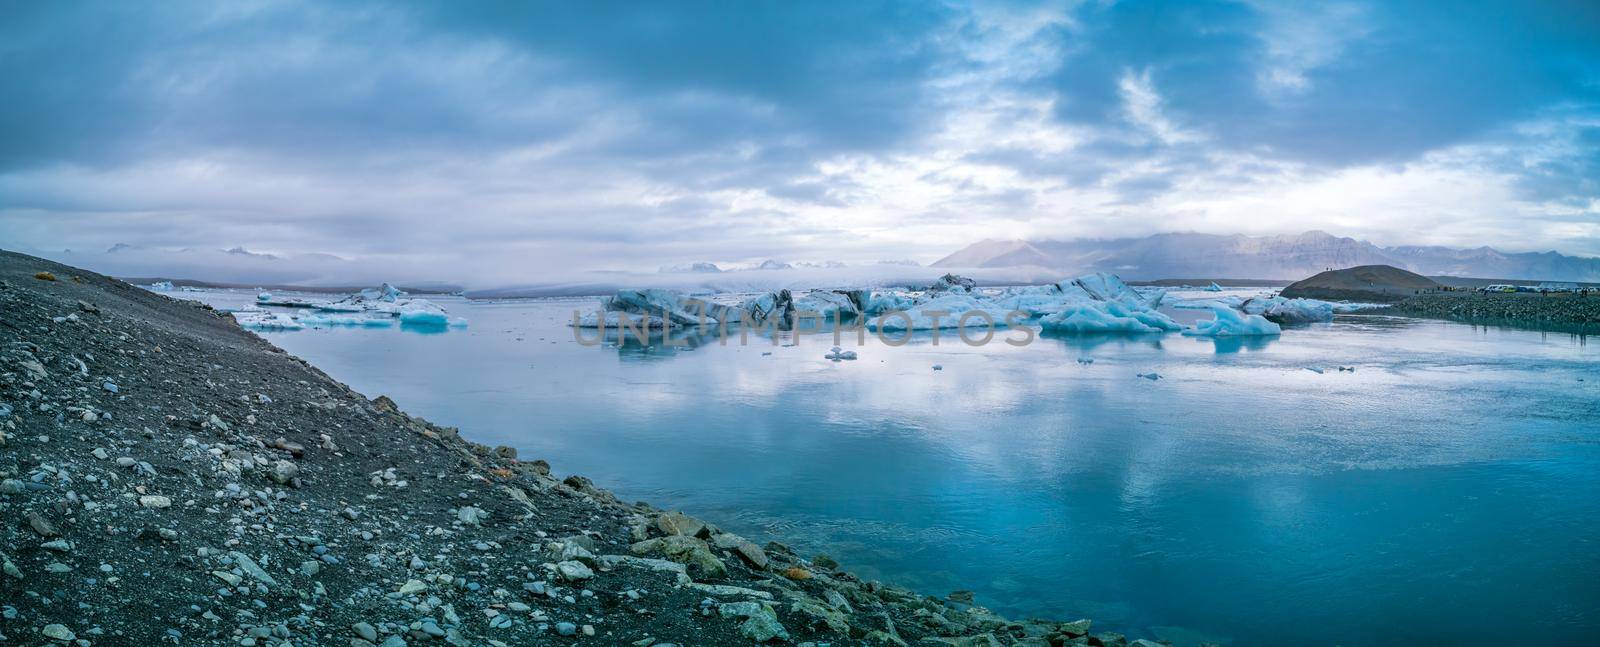 Panoramic view of jokulsarlon lagoon exit canal with icebergs